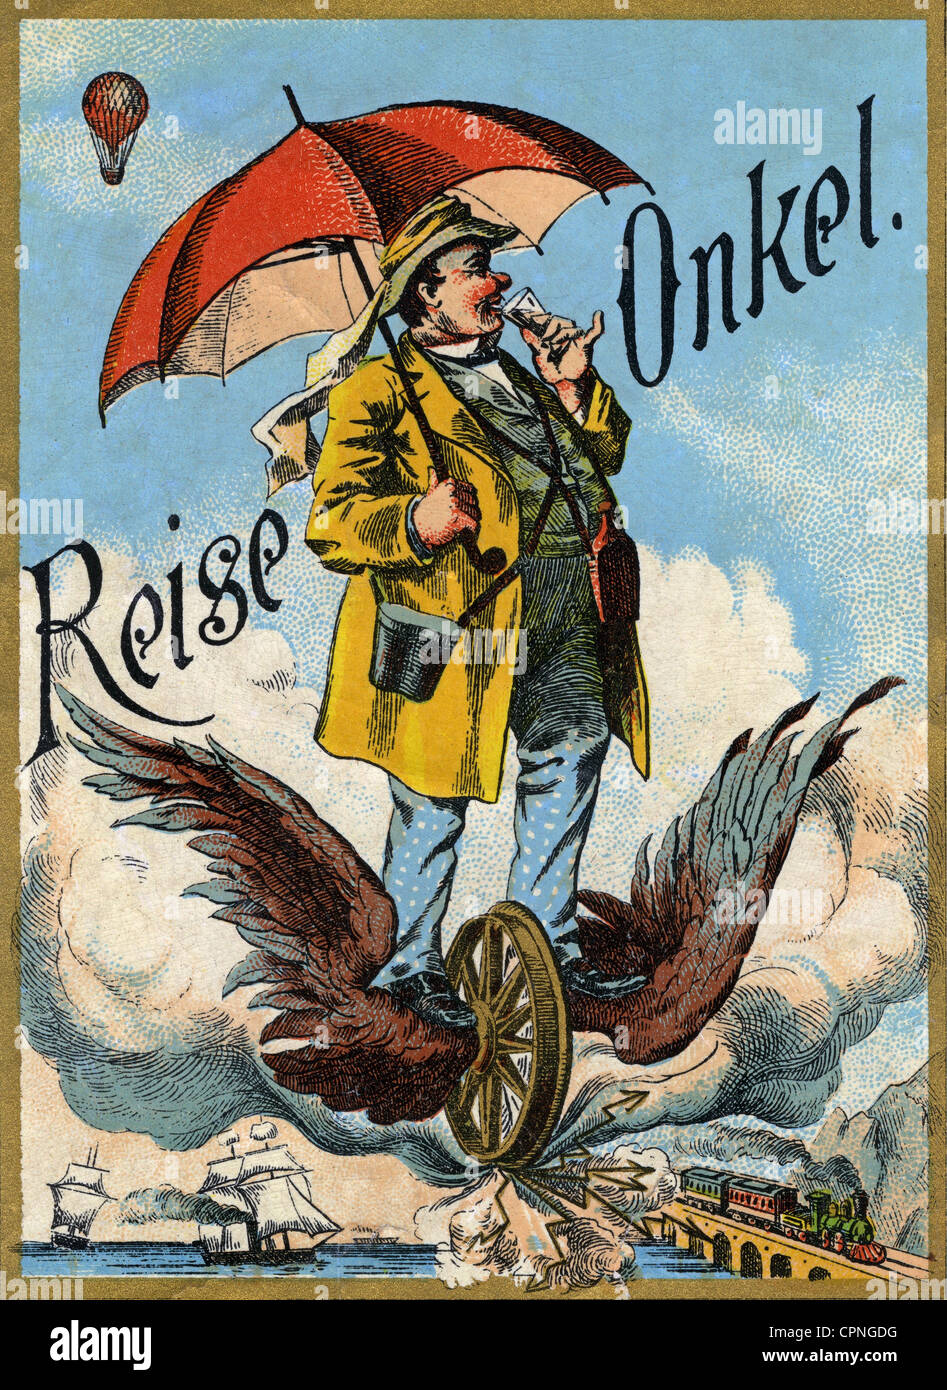 tourism, travel uncle, caricature, Germany, circa 1895, Additional-Rights-Clearences-Not Available Stock Photo